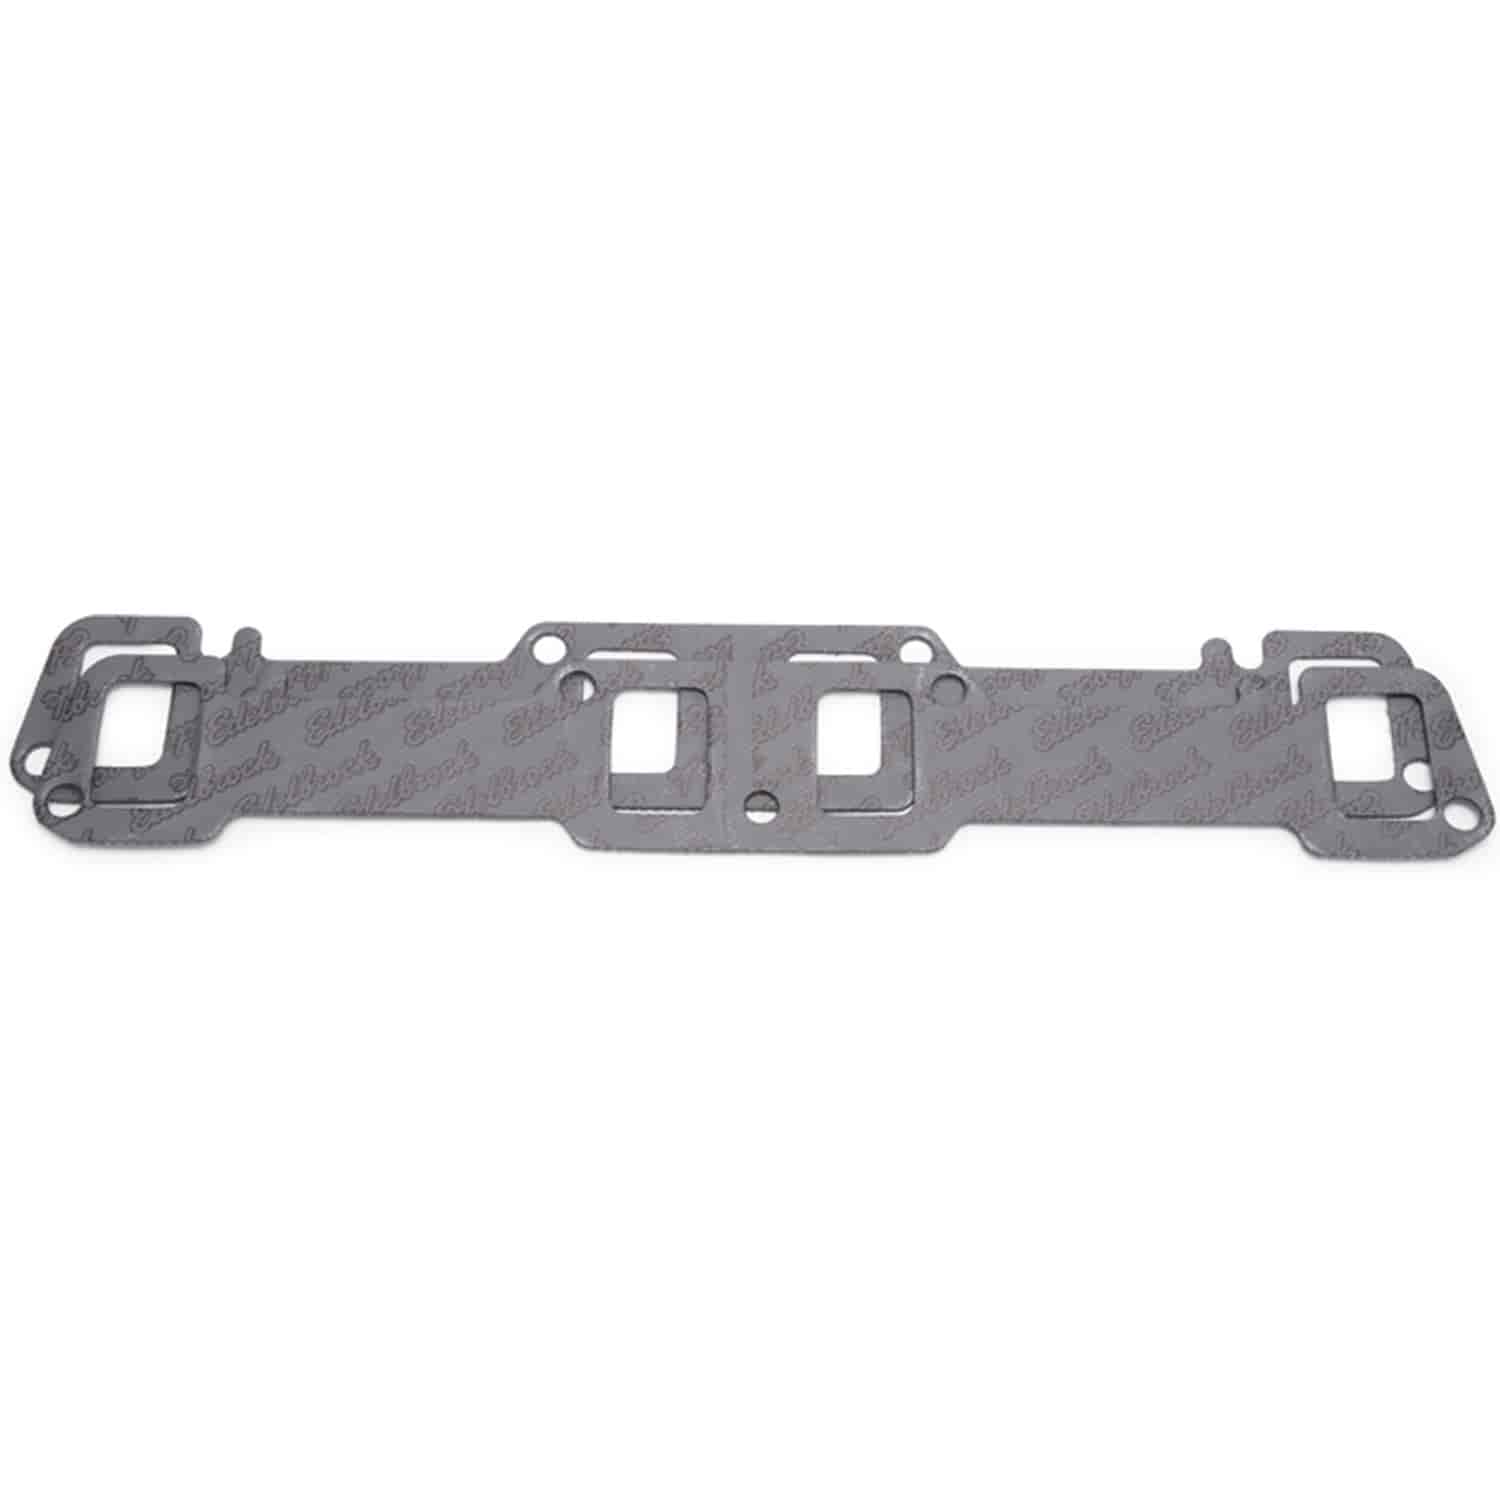 Exhaust Gaskets for Buick 400-455